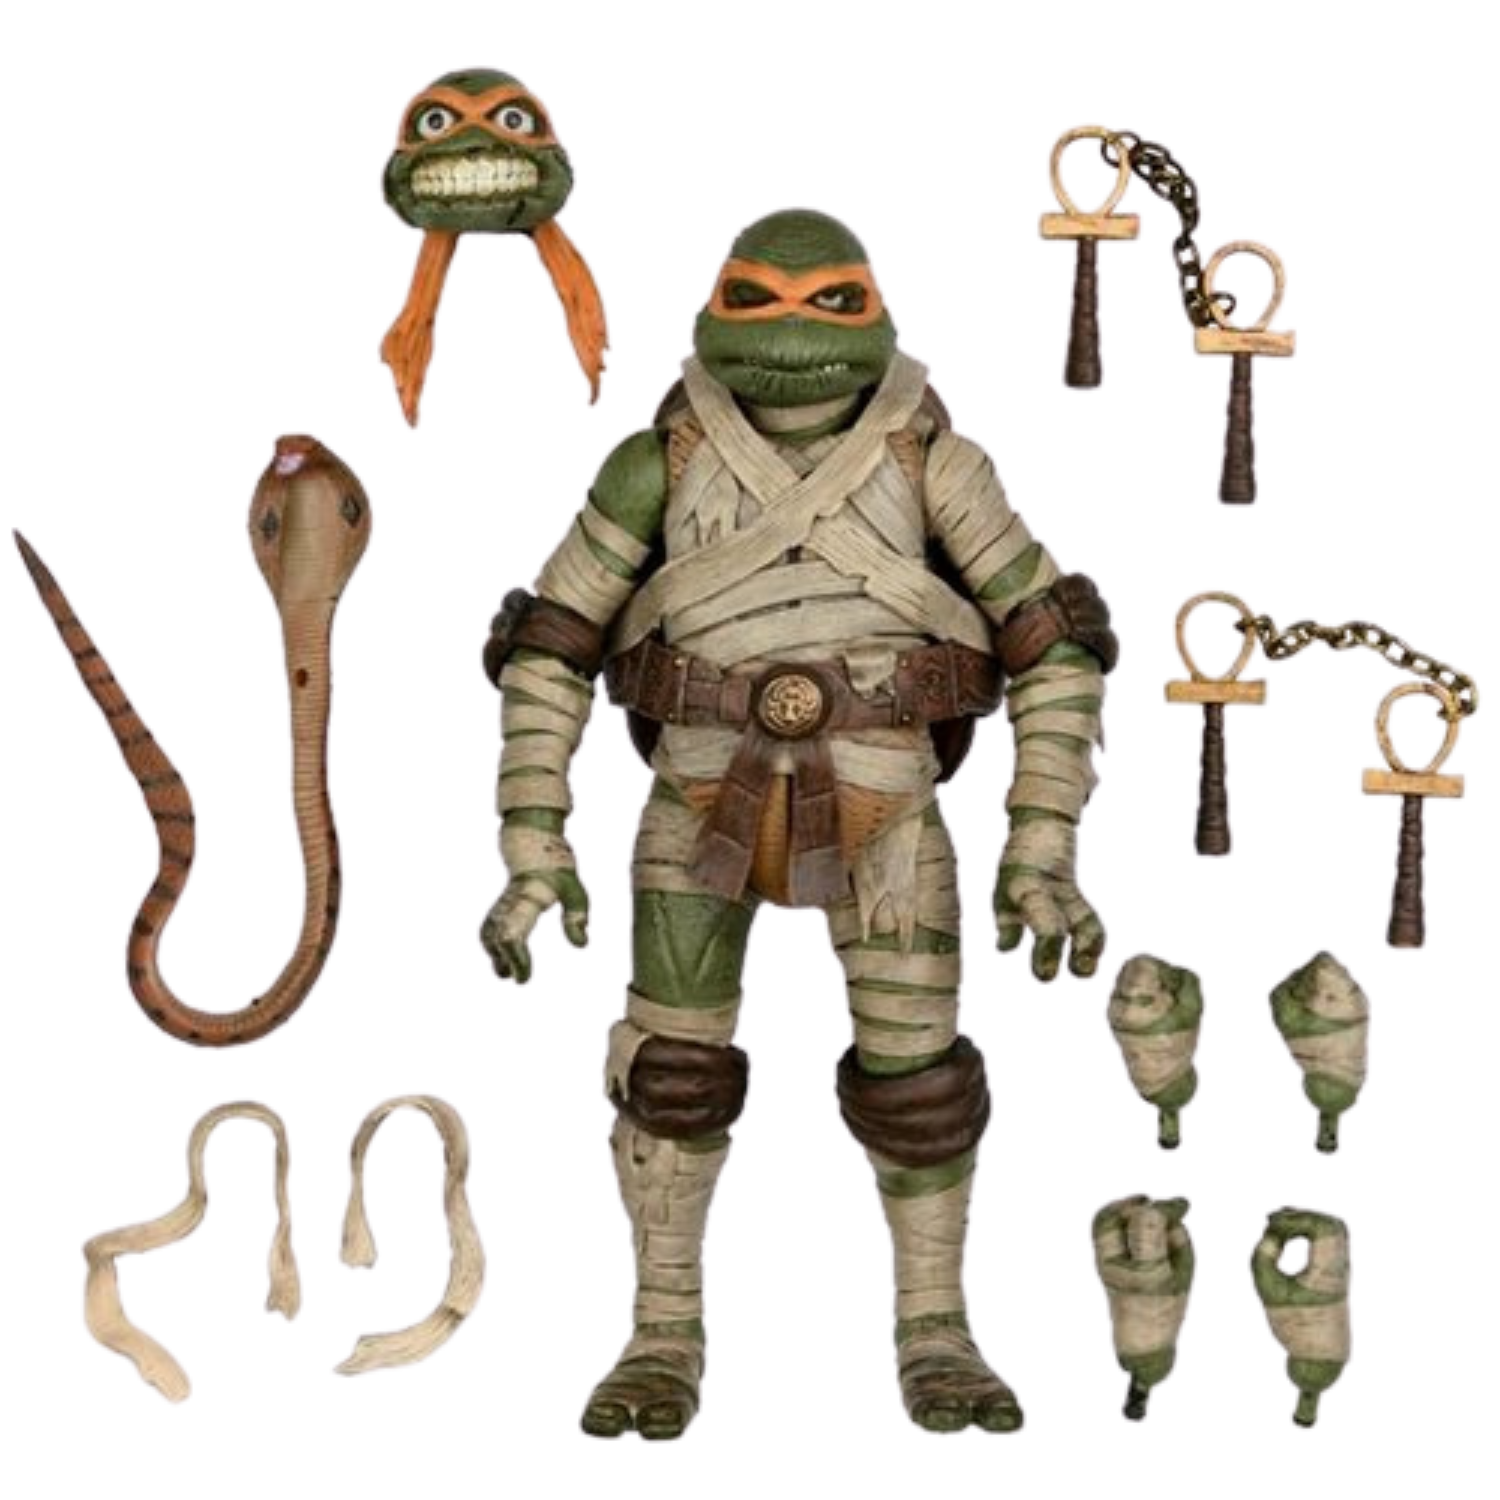 This image shows Michelangelo from 'TMNT' dressed up from 'The Mummy'